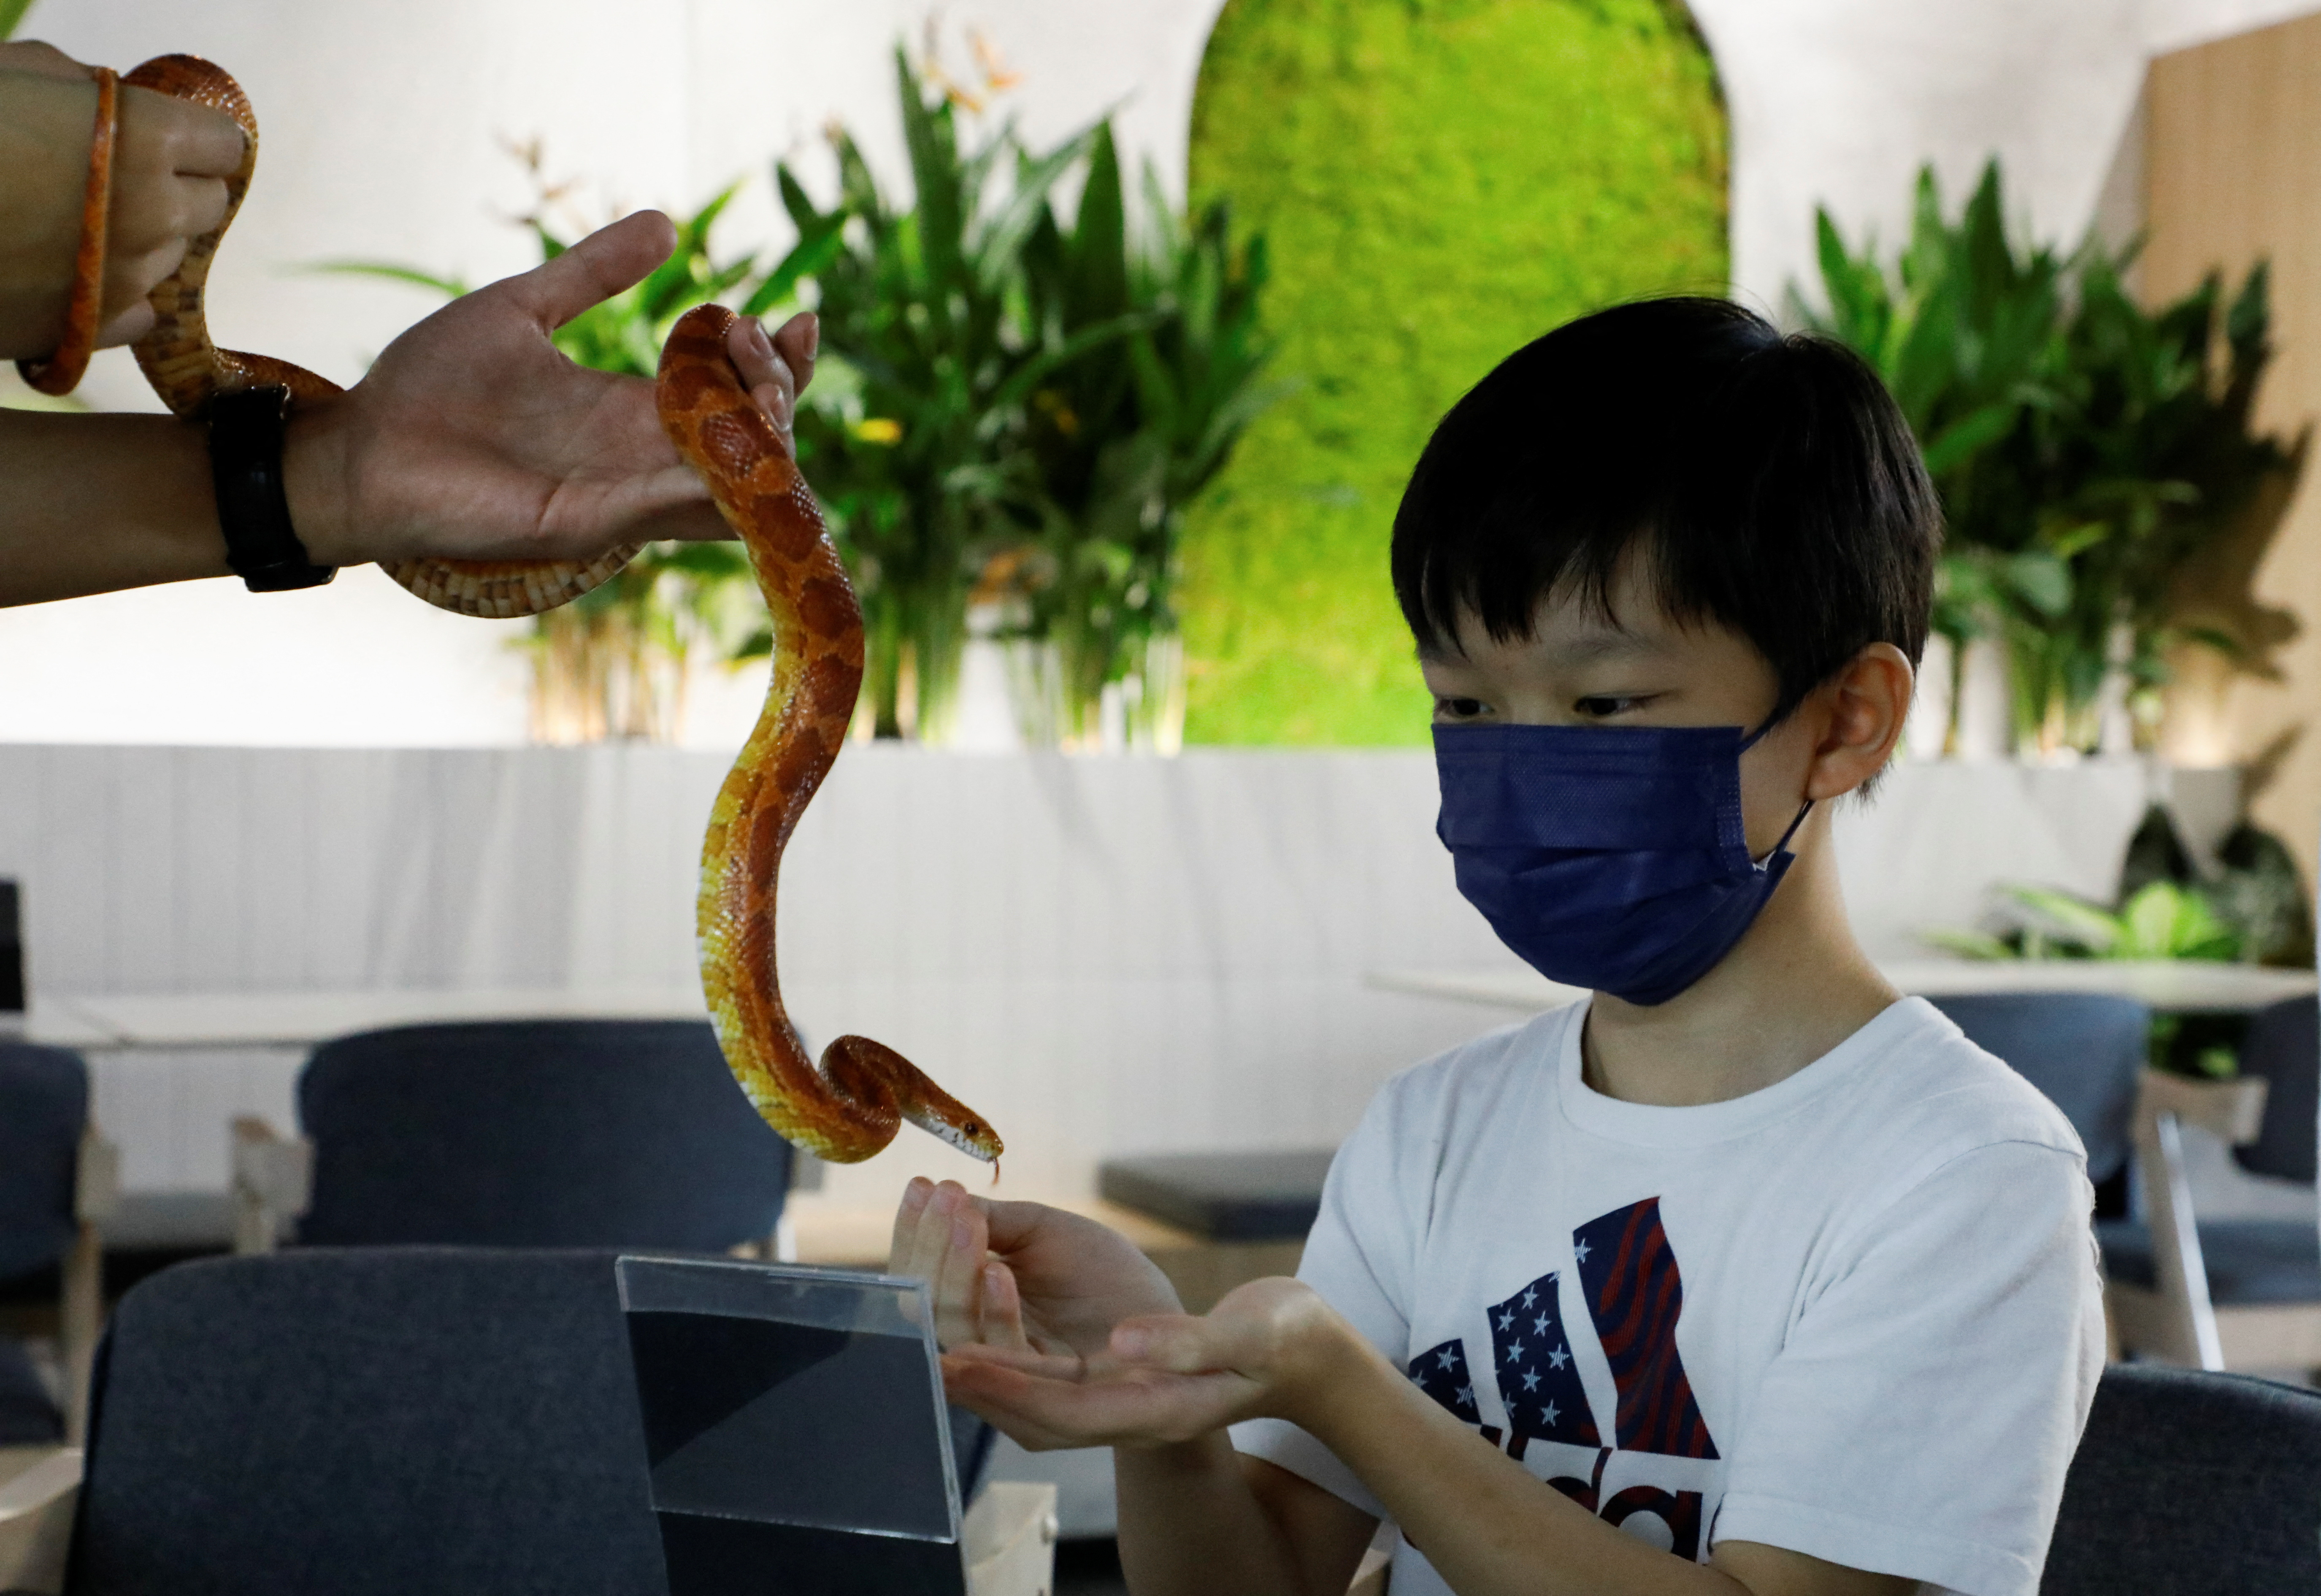 Snakes, lizards and desserts meet in Malaysia's first reptile cafe | Reuters